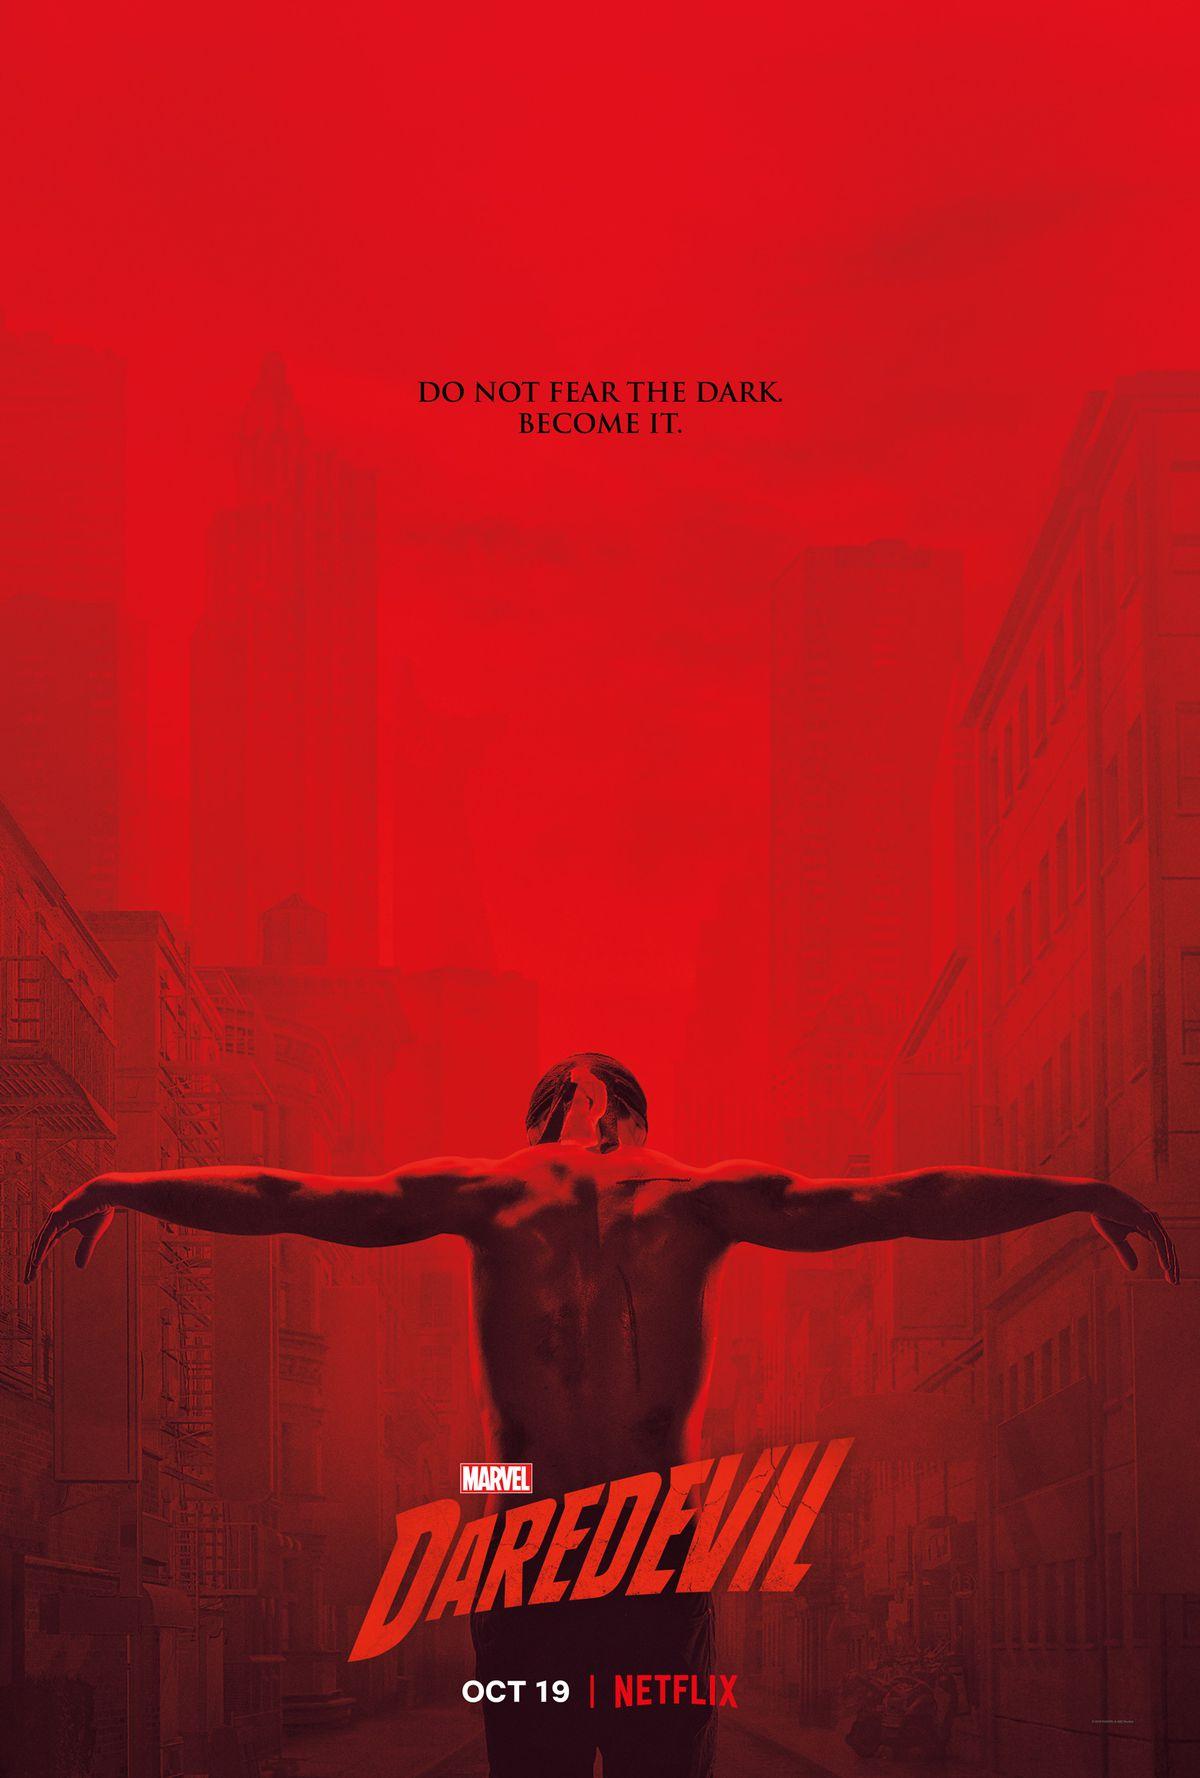 Daredevil' returns with new Season 3 teaser, poster & premiere date